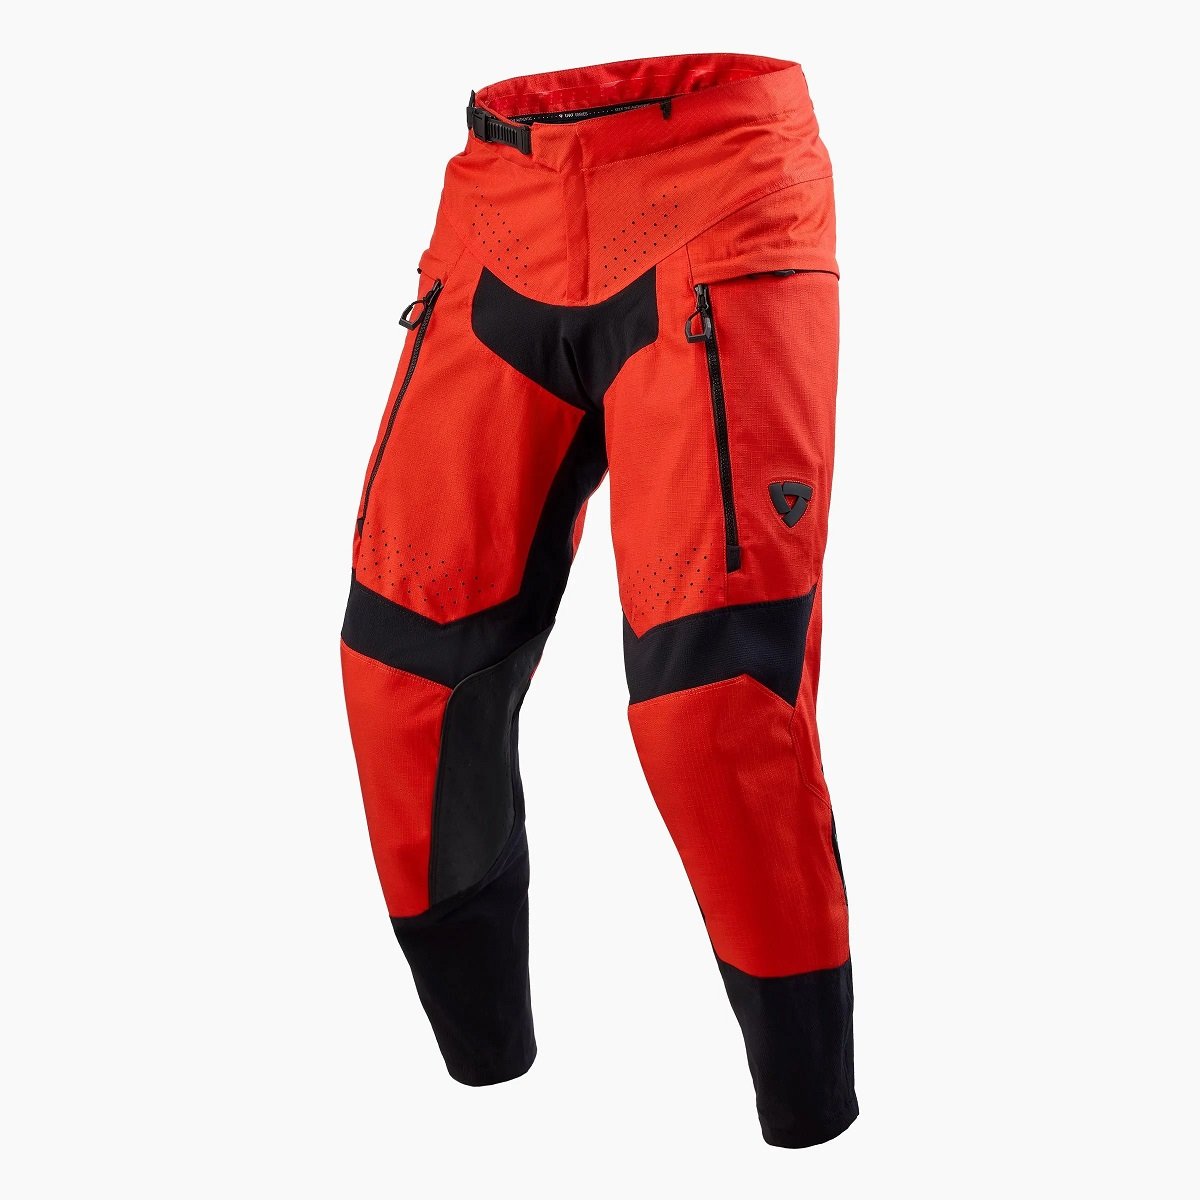 Image of REV'IT! Peninsula Trousers Red Motorcycle Pants Size L ID 8700001349000